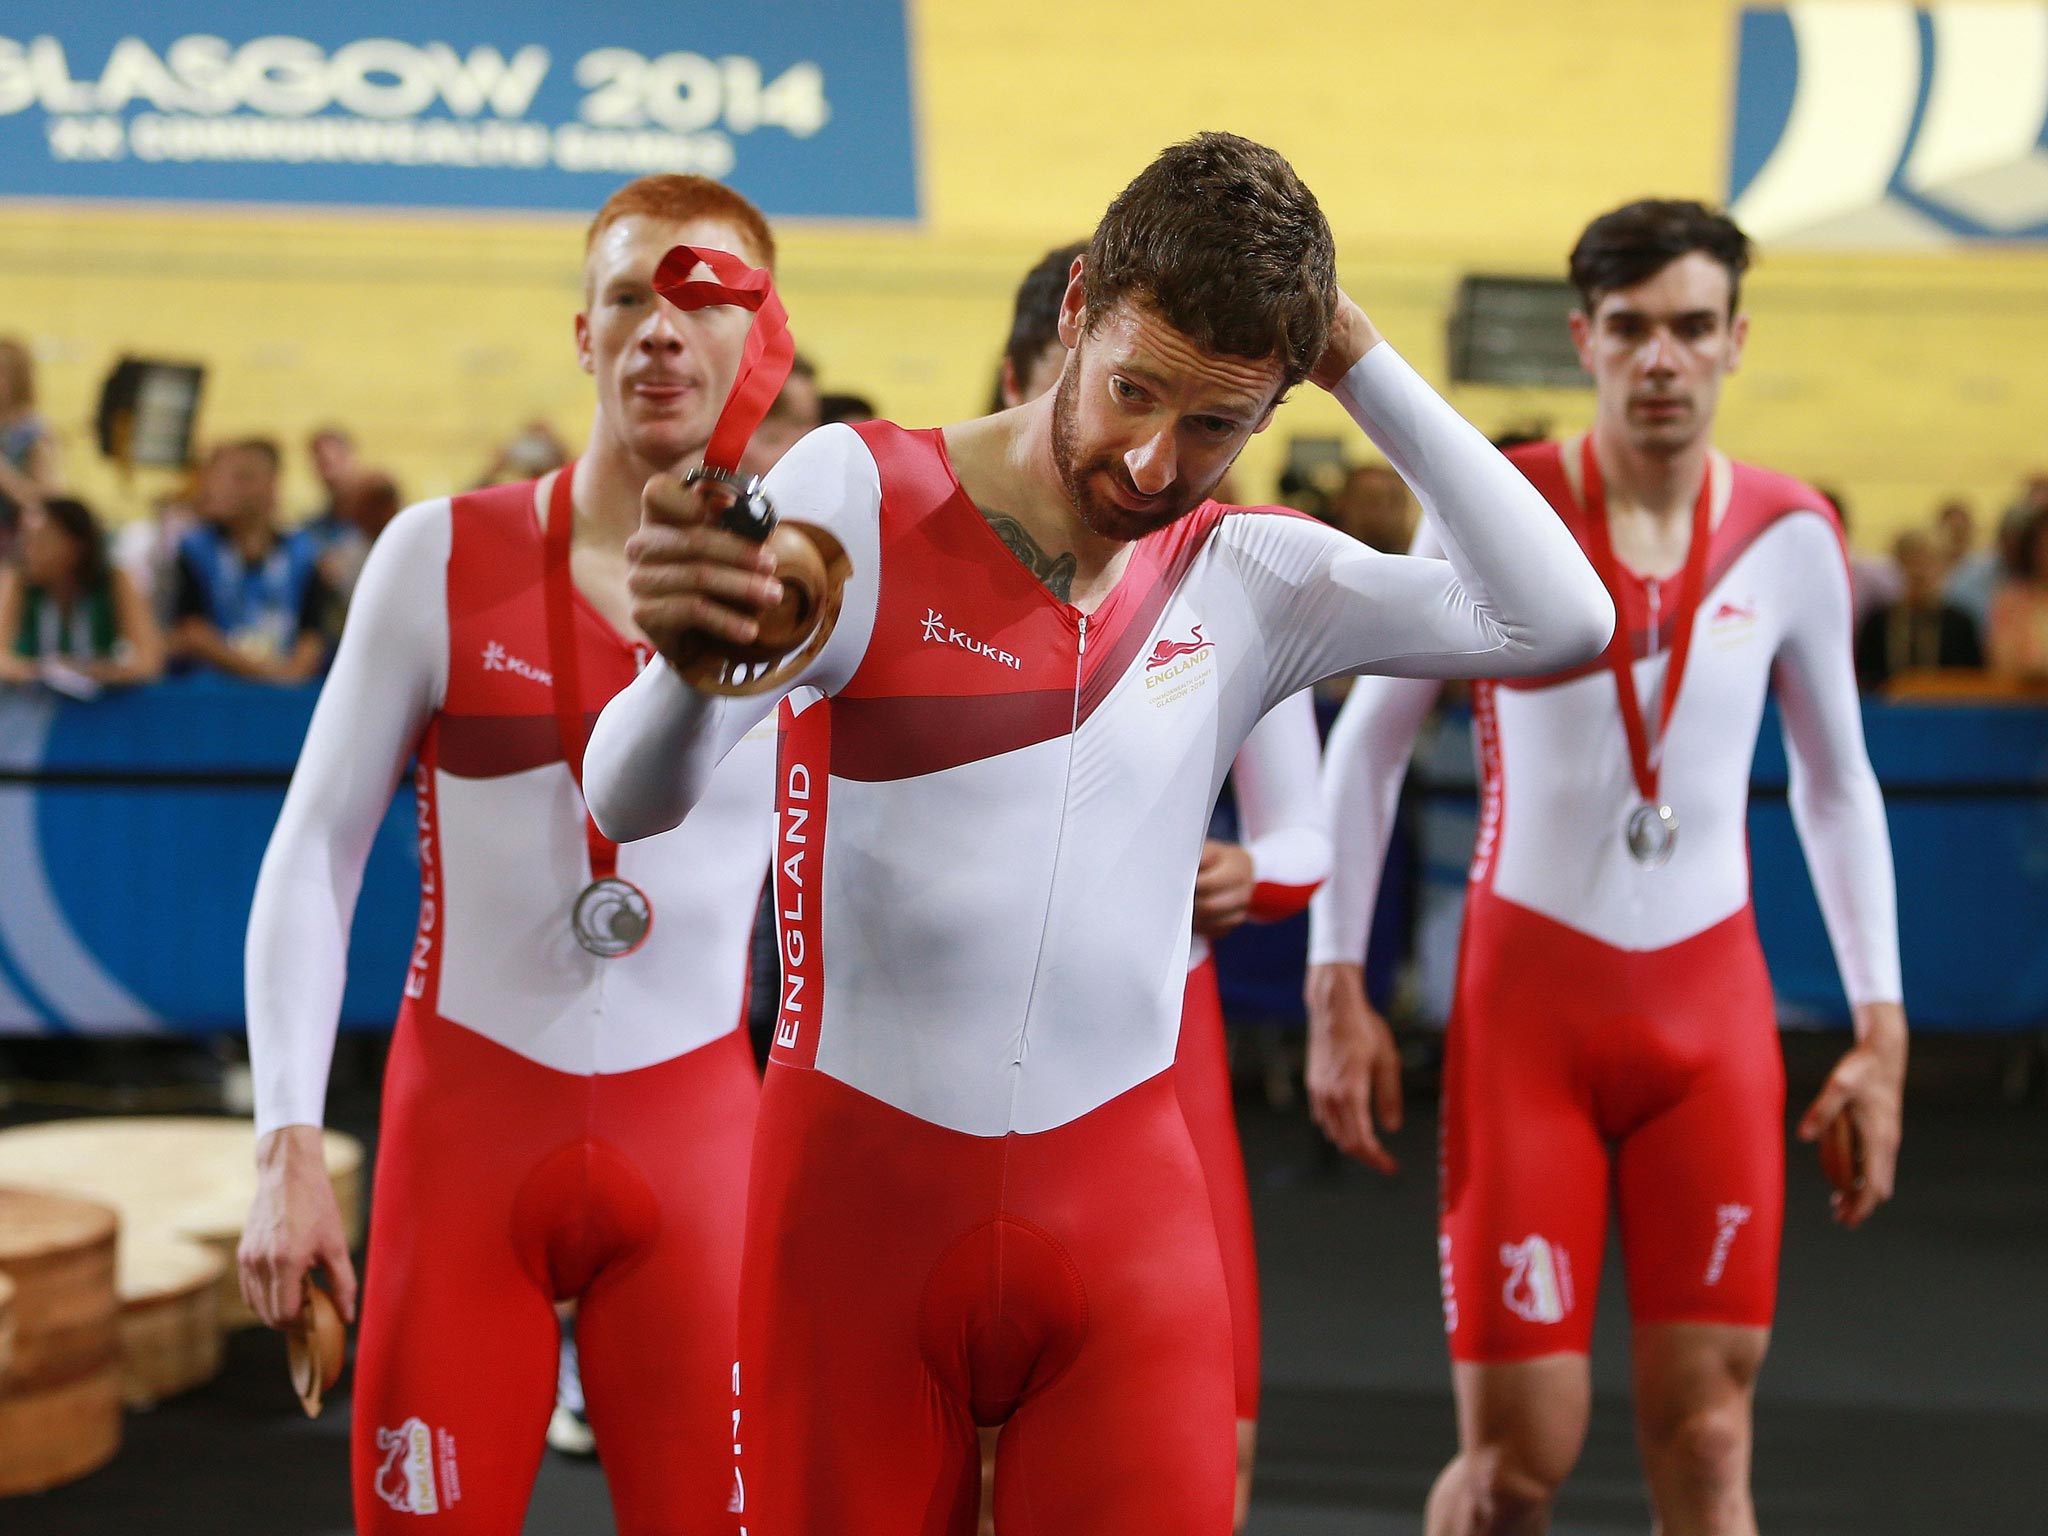 Sir Bradley Wiggins removes his silver medal after the podium ceremony for the men’s 4,000m team pursuit in Glasgow yesterday